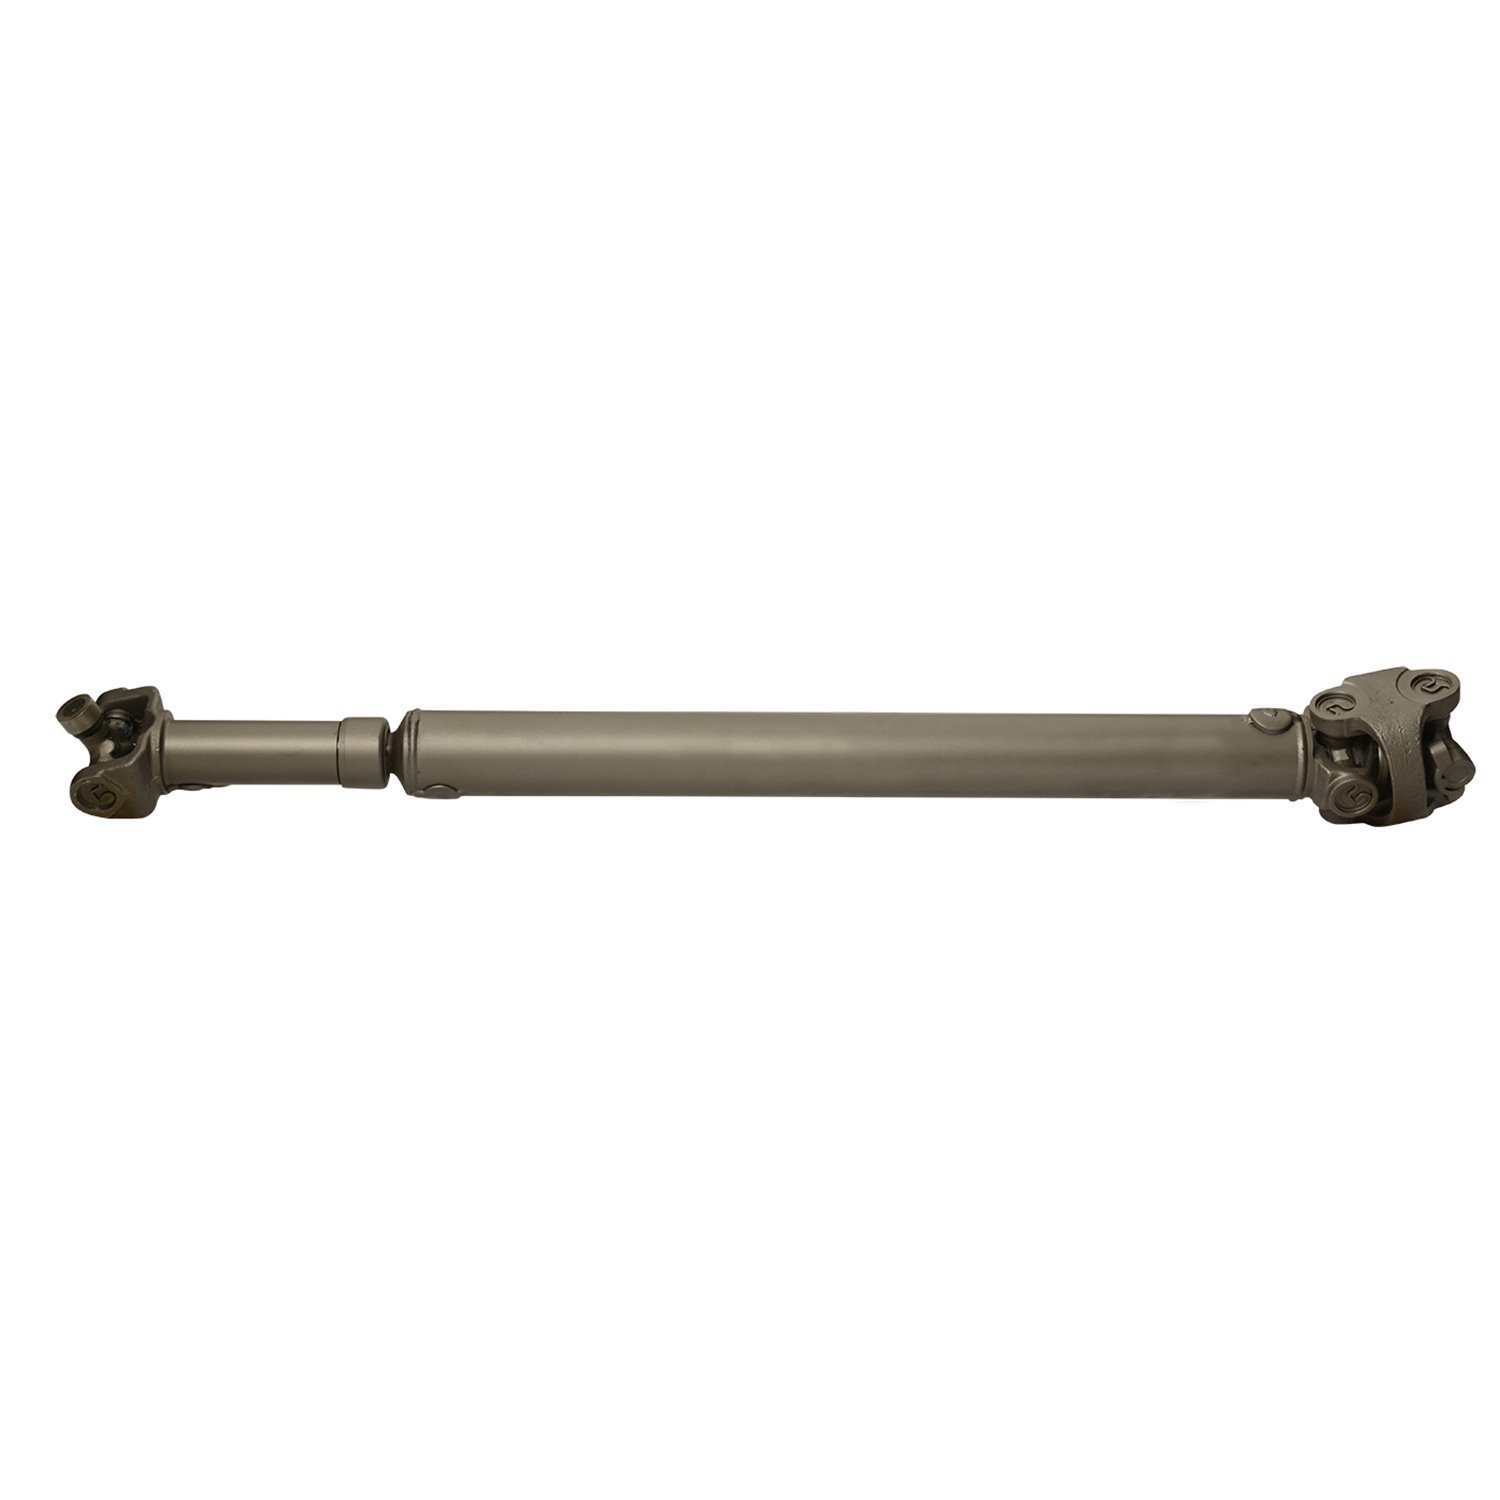 USA Standard ZDS9183 Front Driveshaft, For F250, 30-13/16 in. Center-To-Center